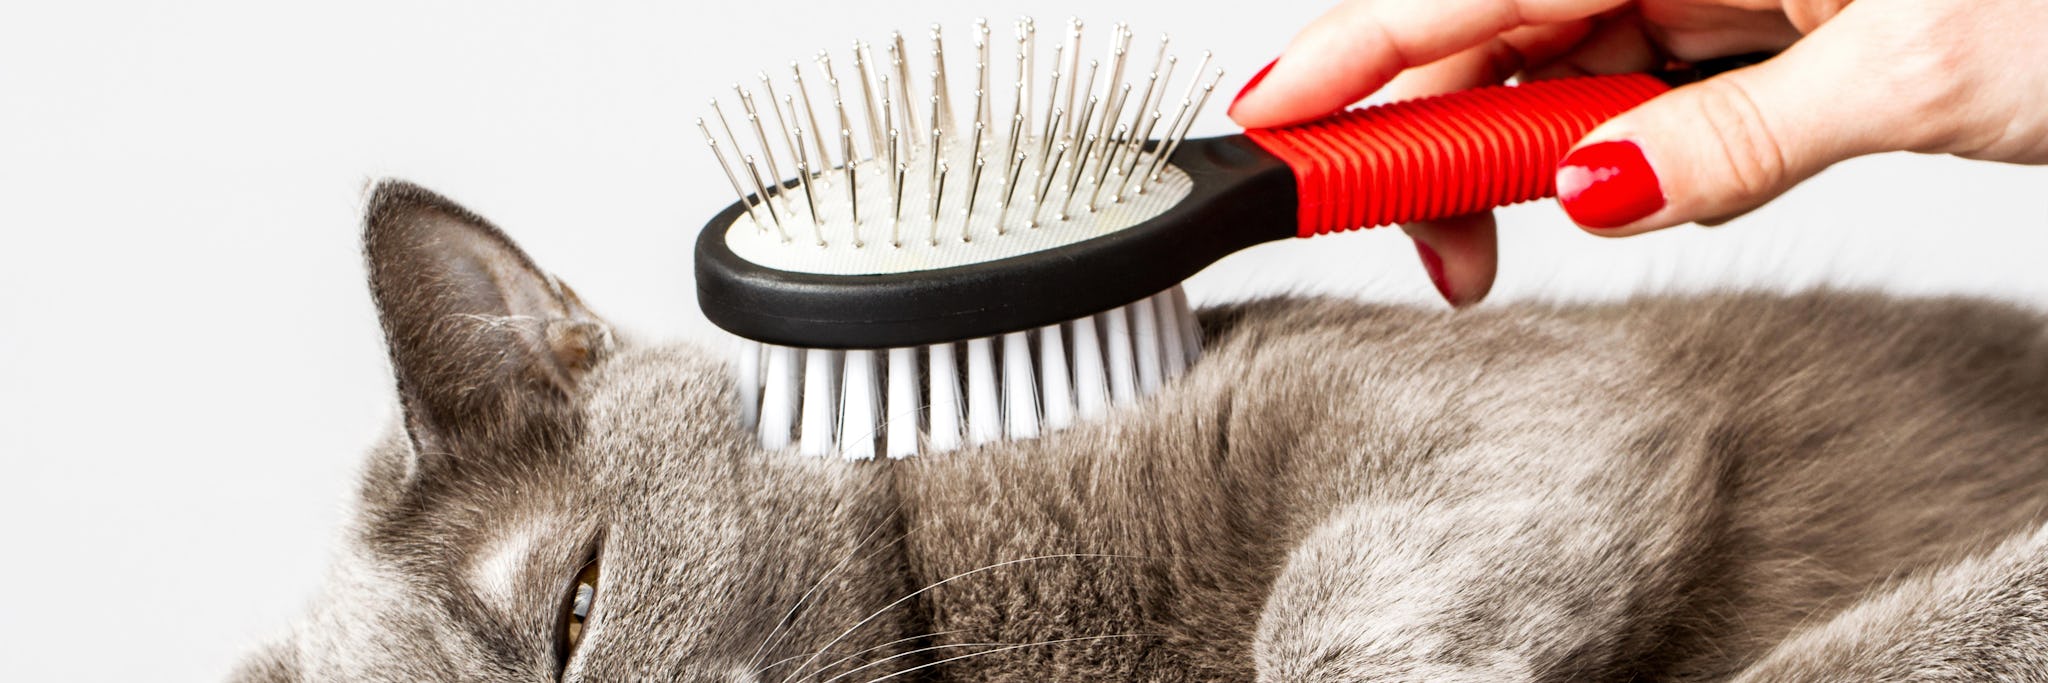 Cat enjoying being brushed with a comb